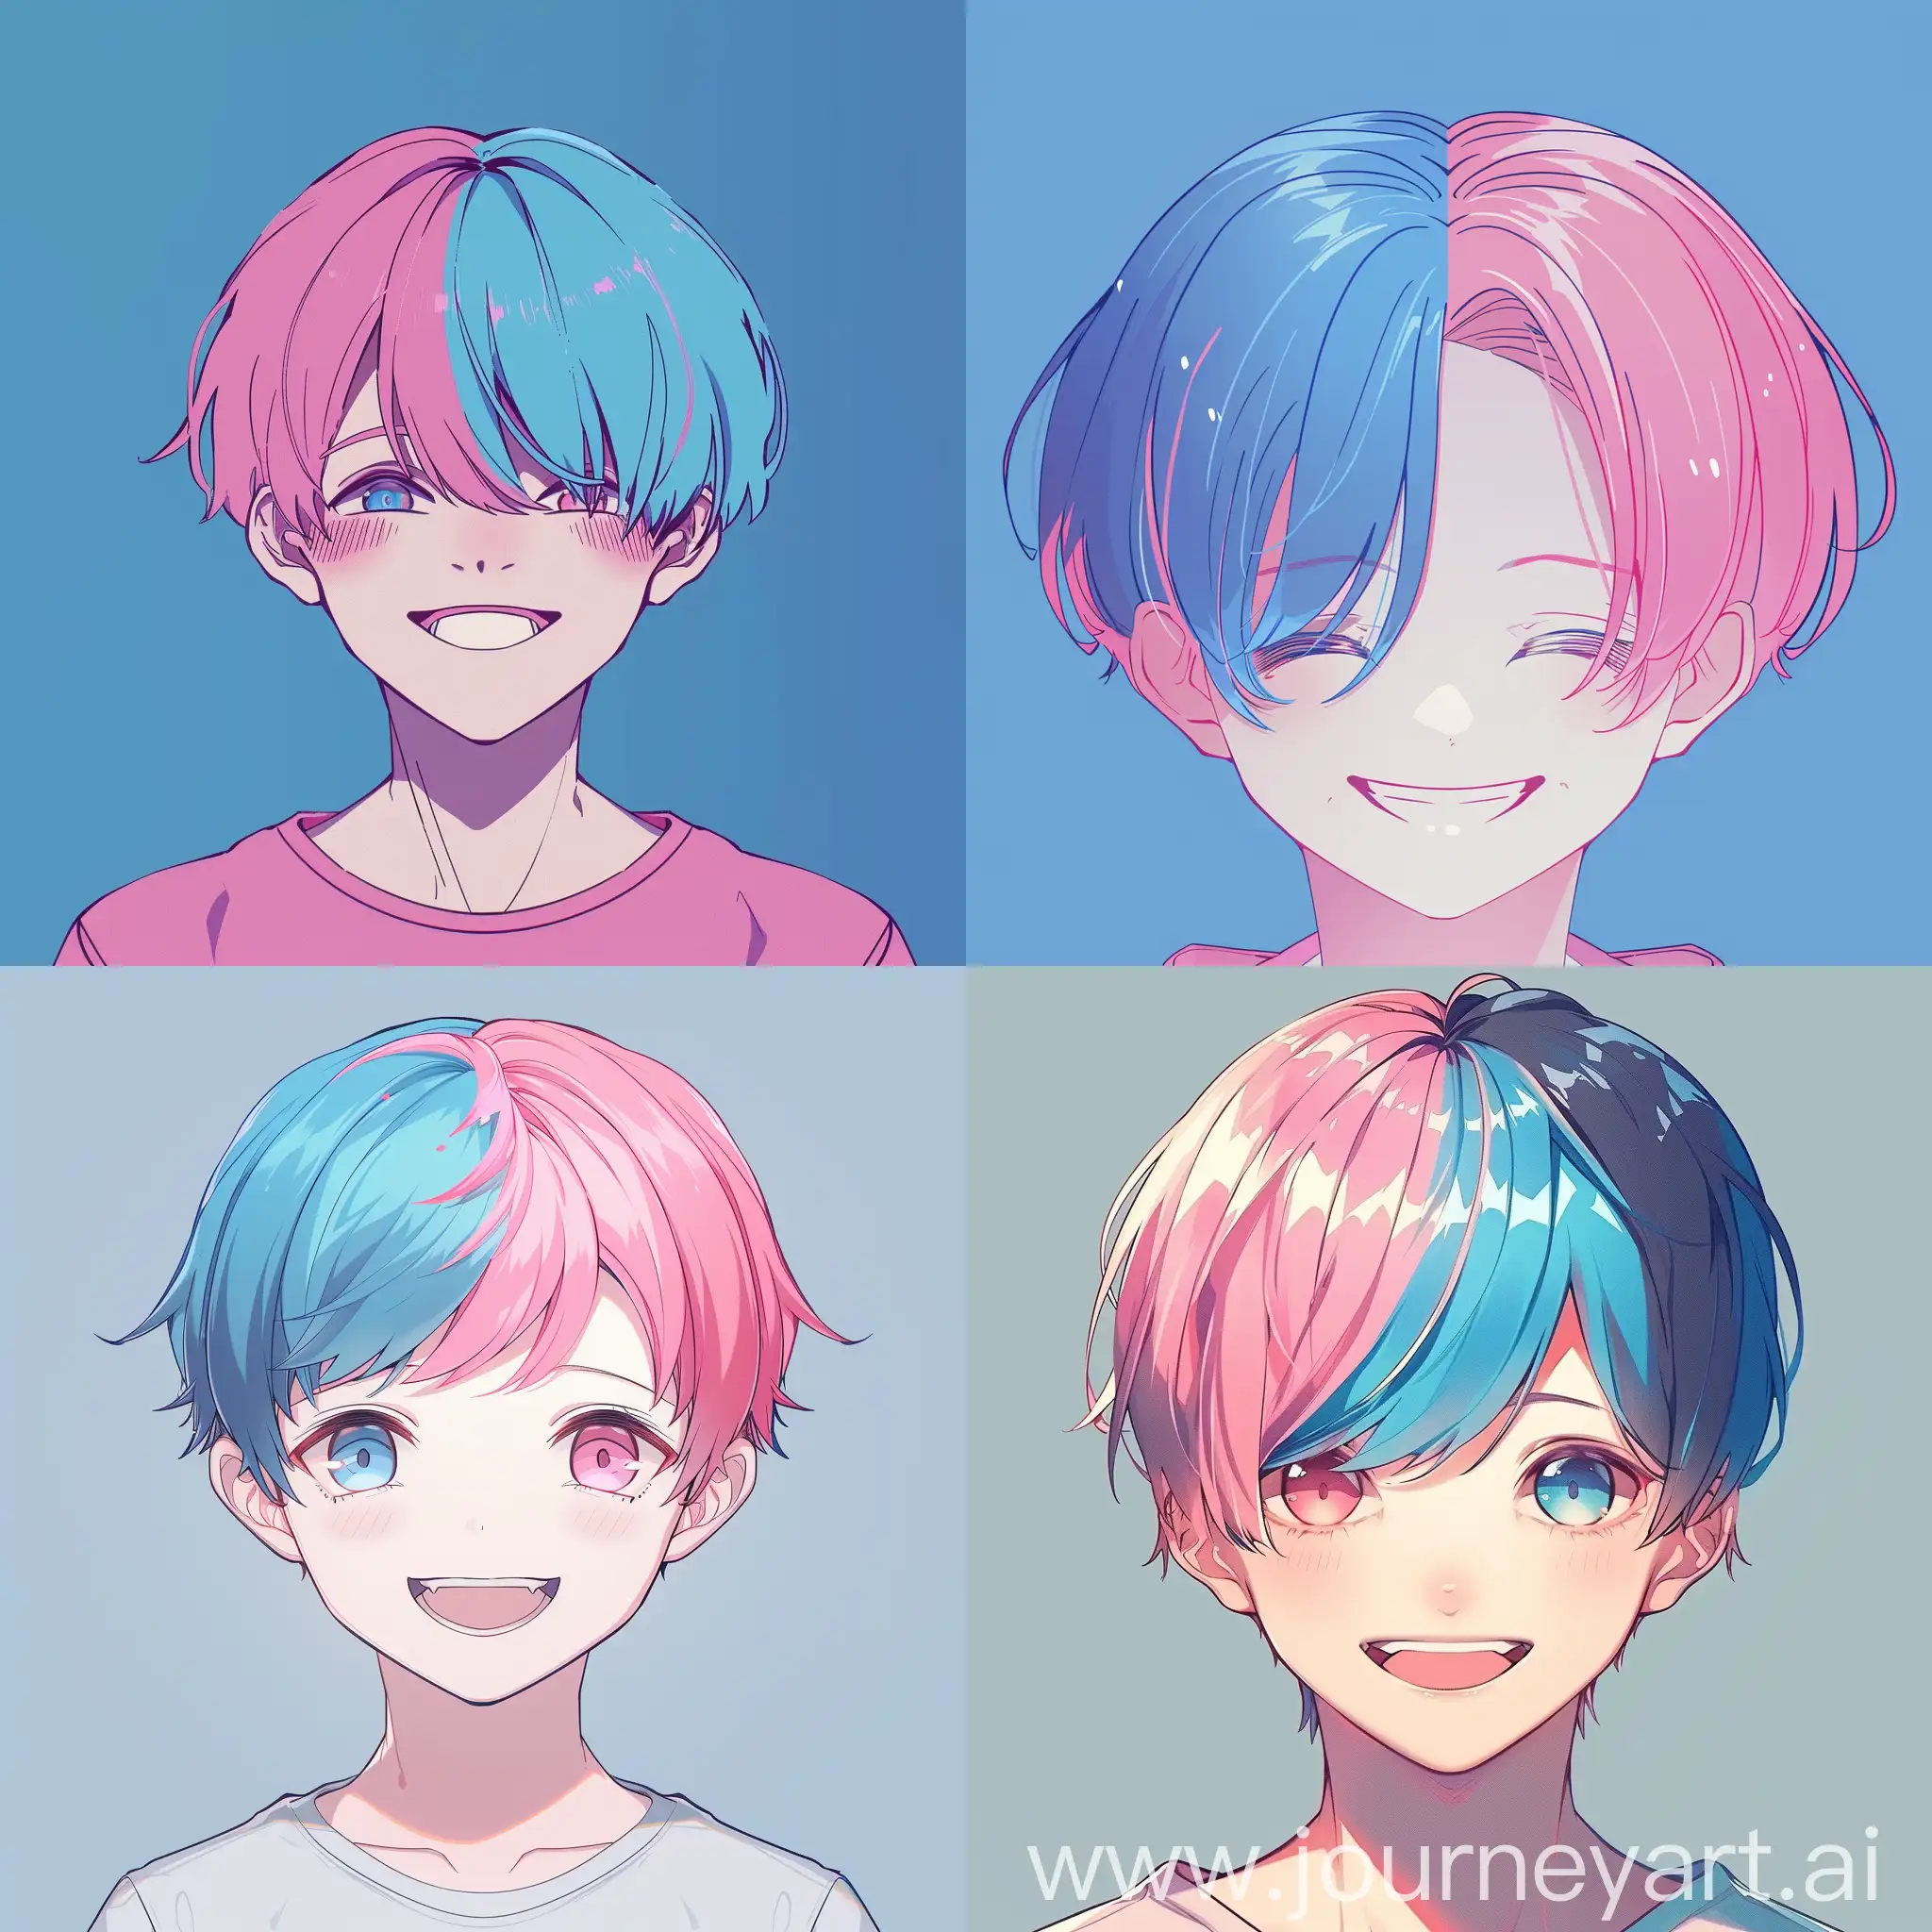 create an image of an anime style boy with a smile on his face, his hair is parted in the middle in two colors, blue and pink